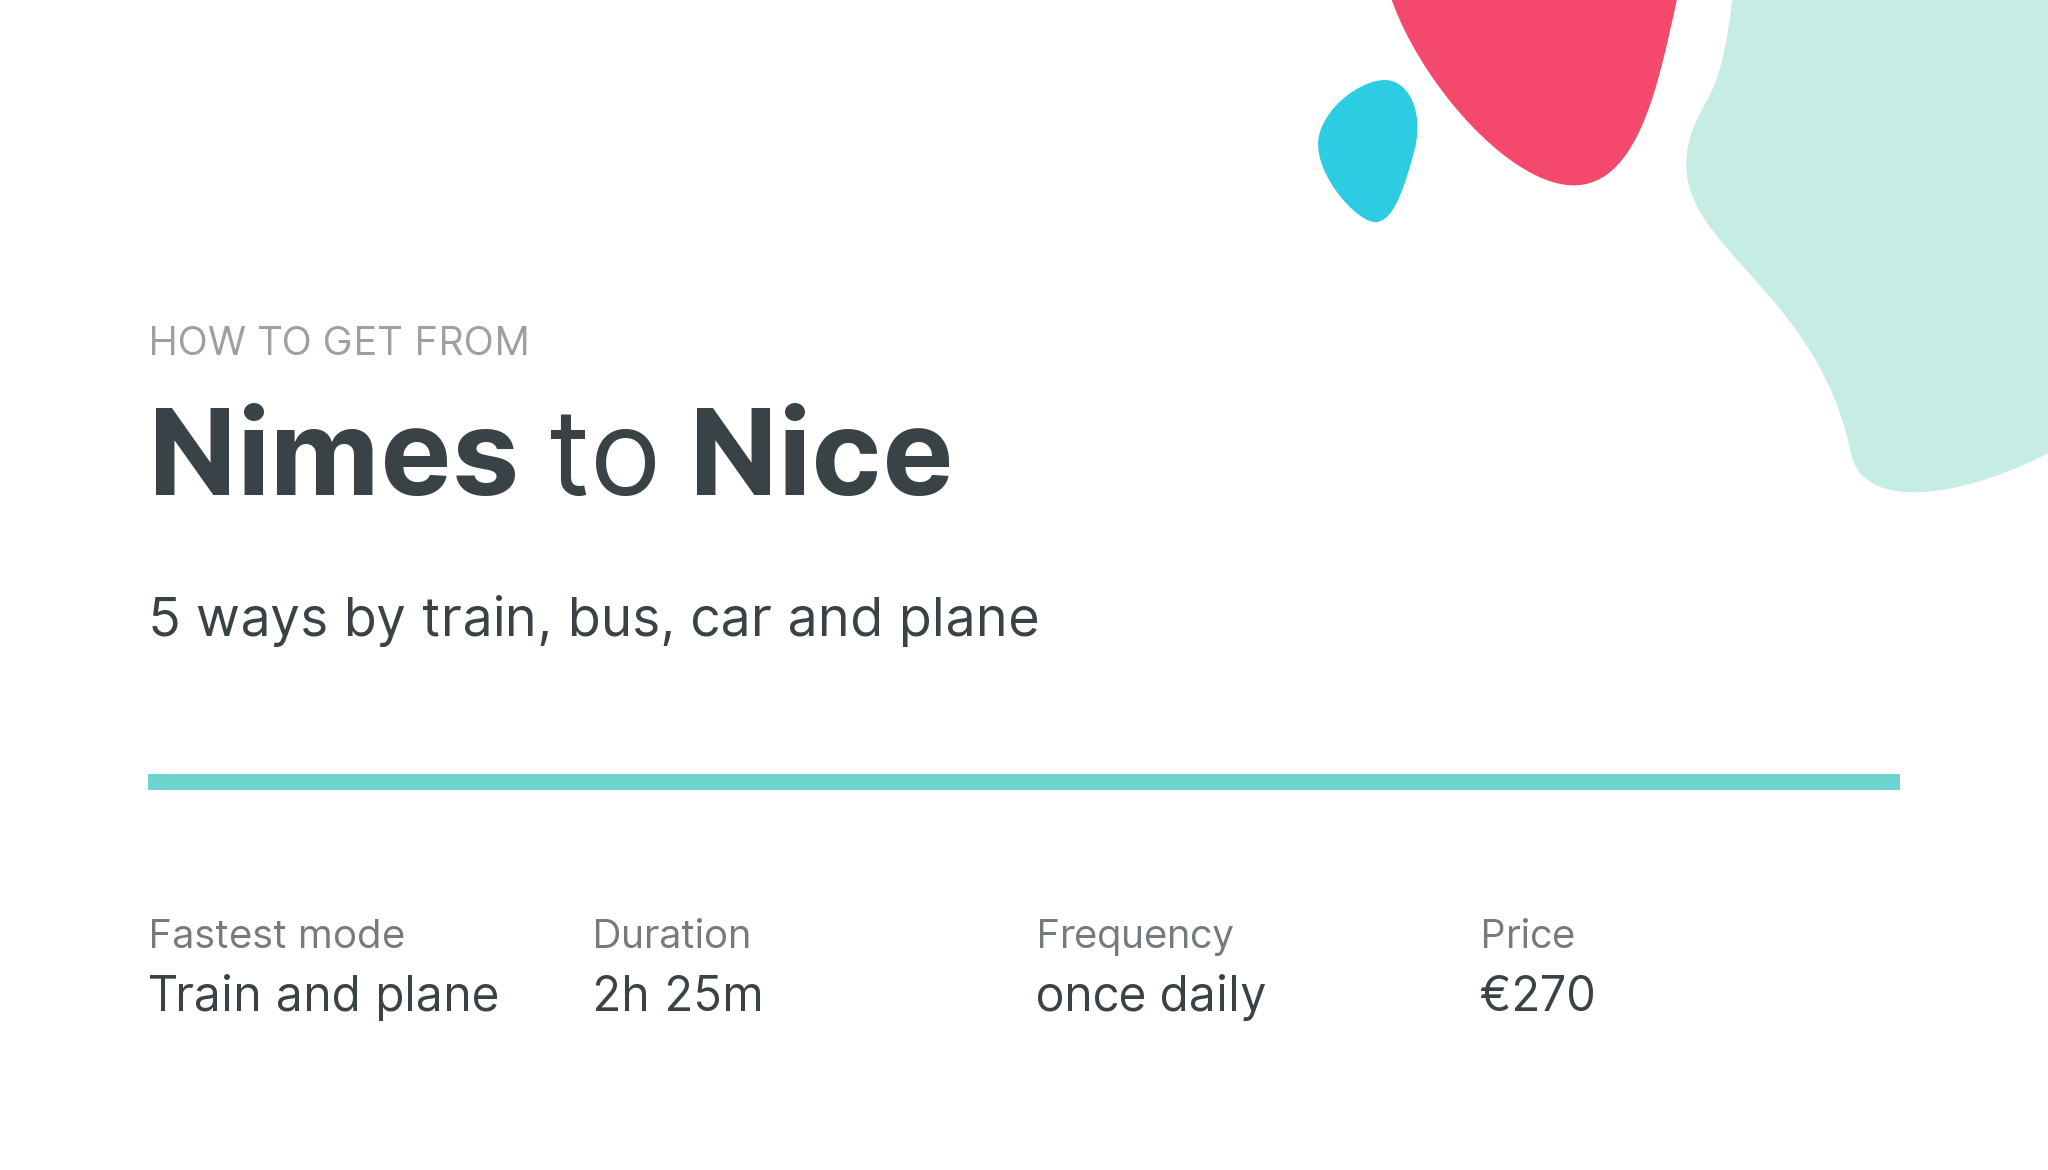 How do I get from Nimes to Nice